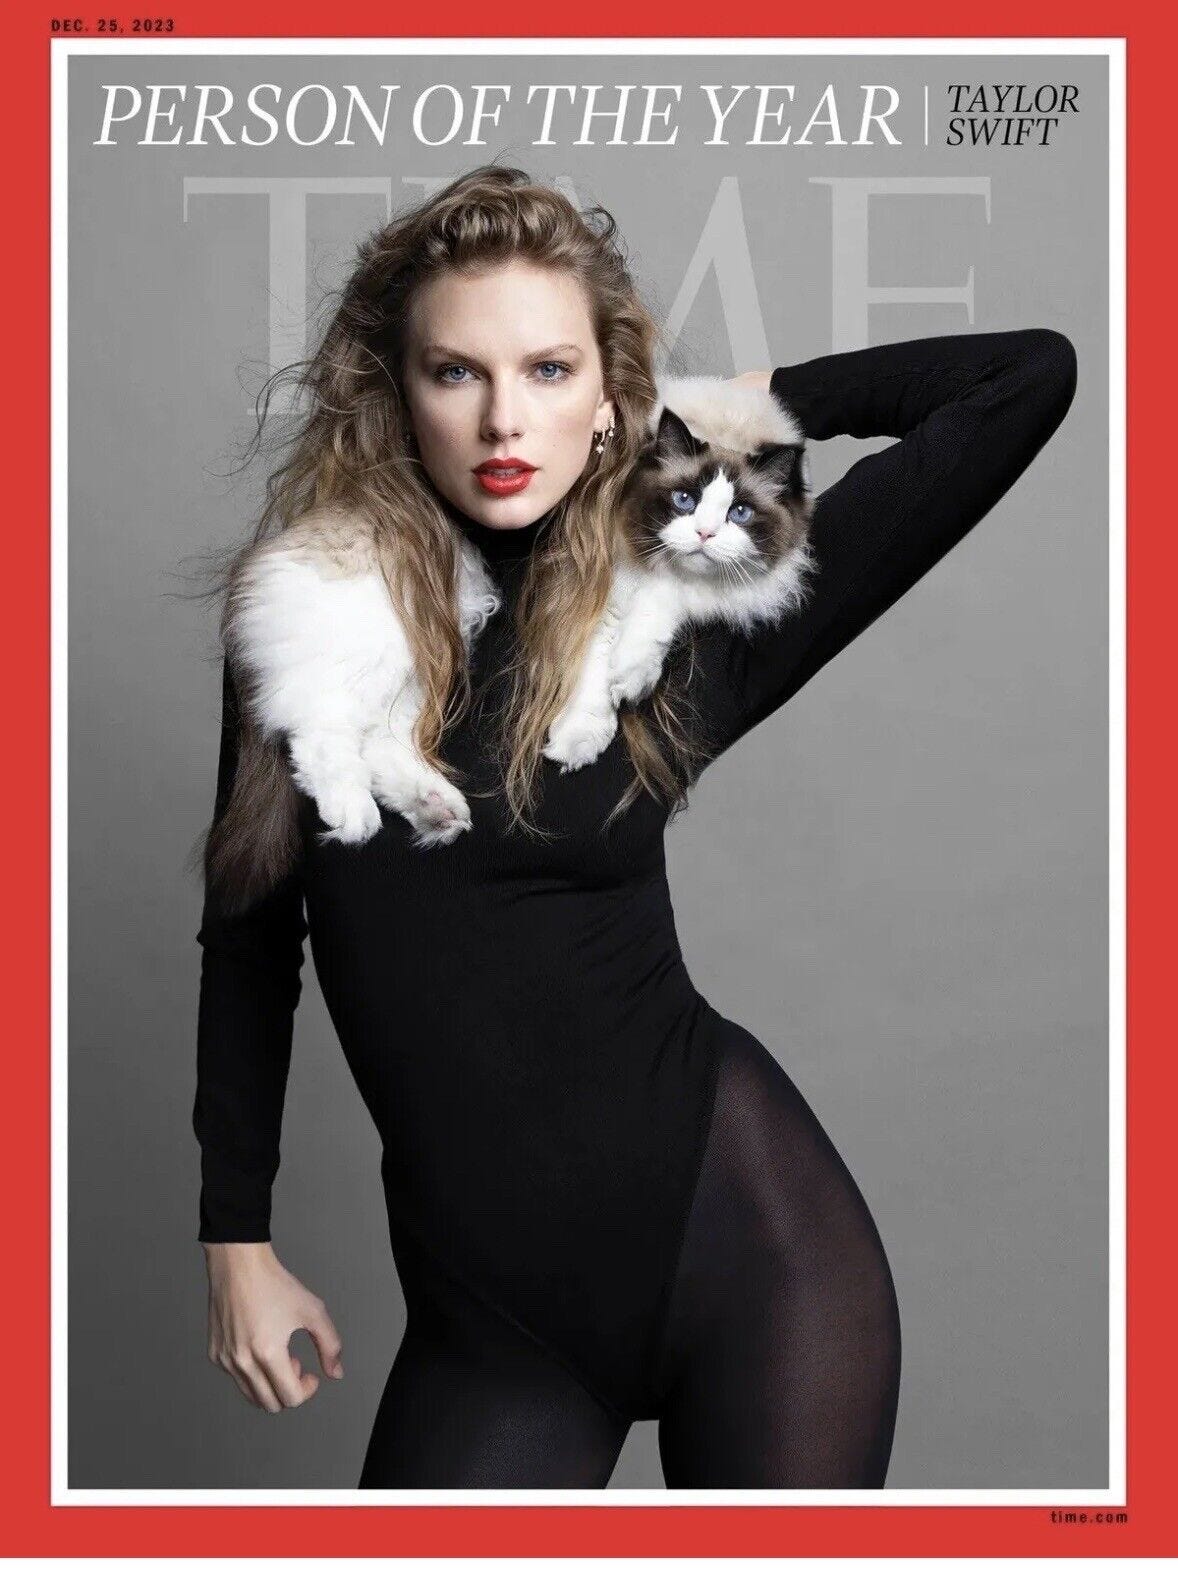 TIME - Person of the Year 2023 TAYLOR SWIFT✨ All 3 Mags-Ships Quickly! - Picture 1 of 3